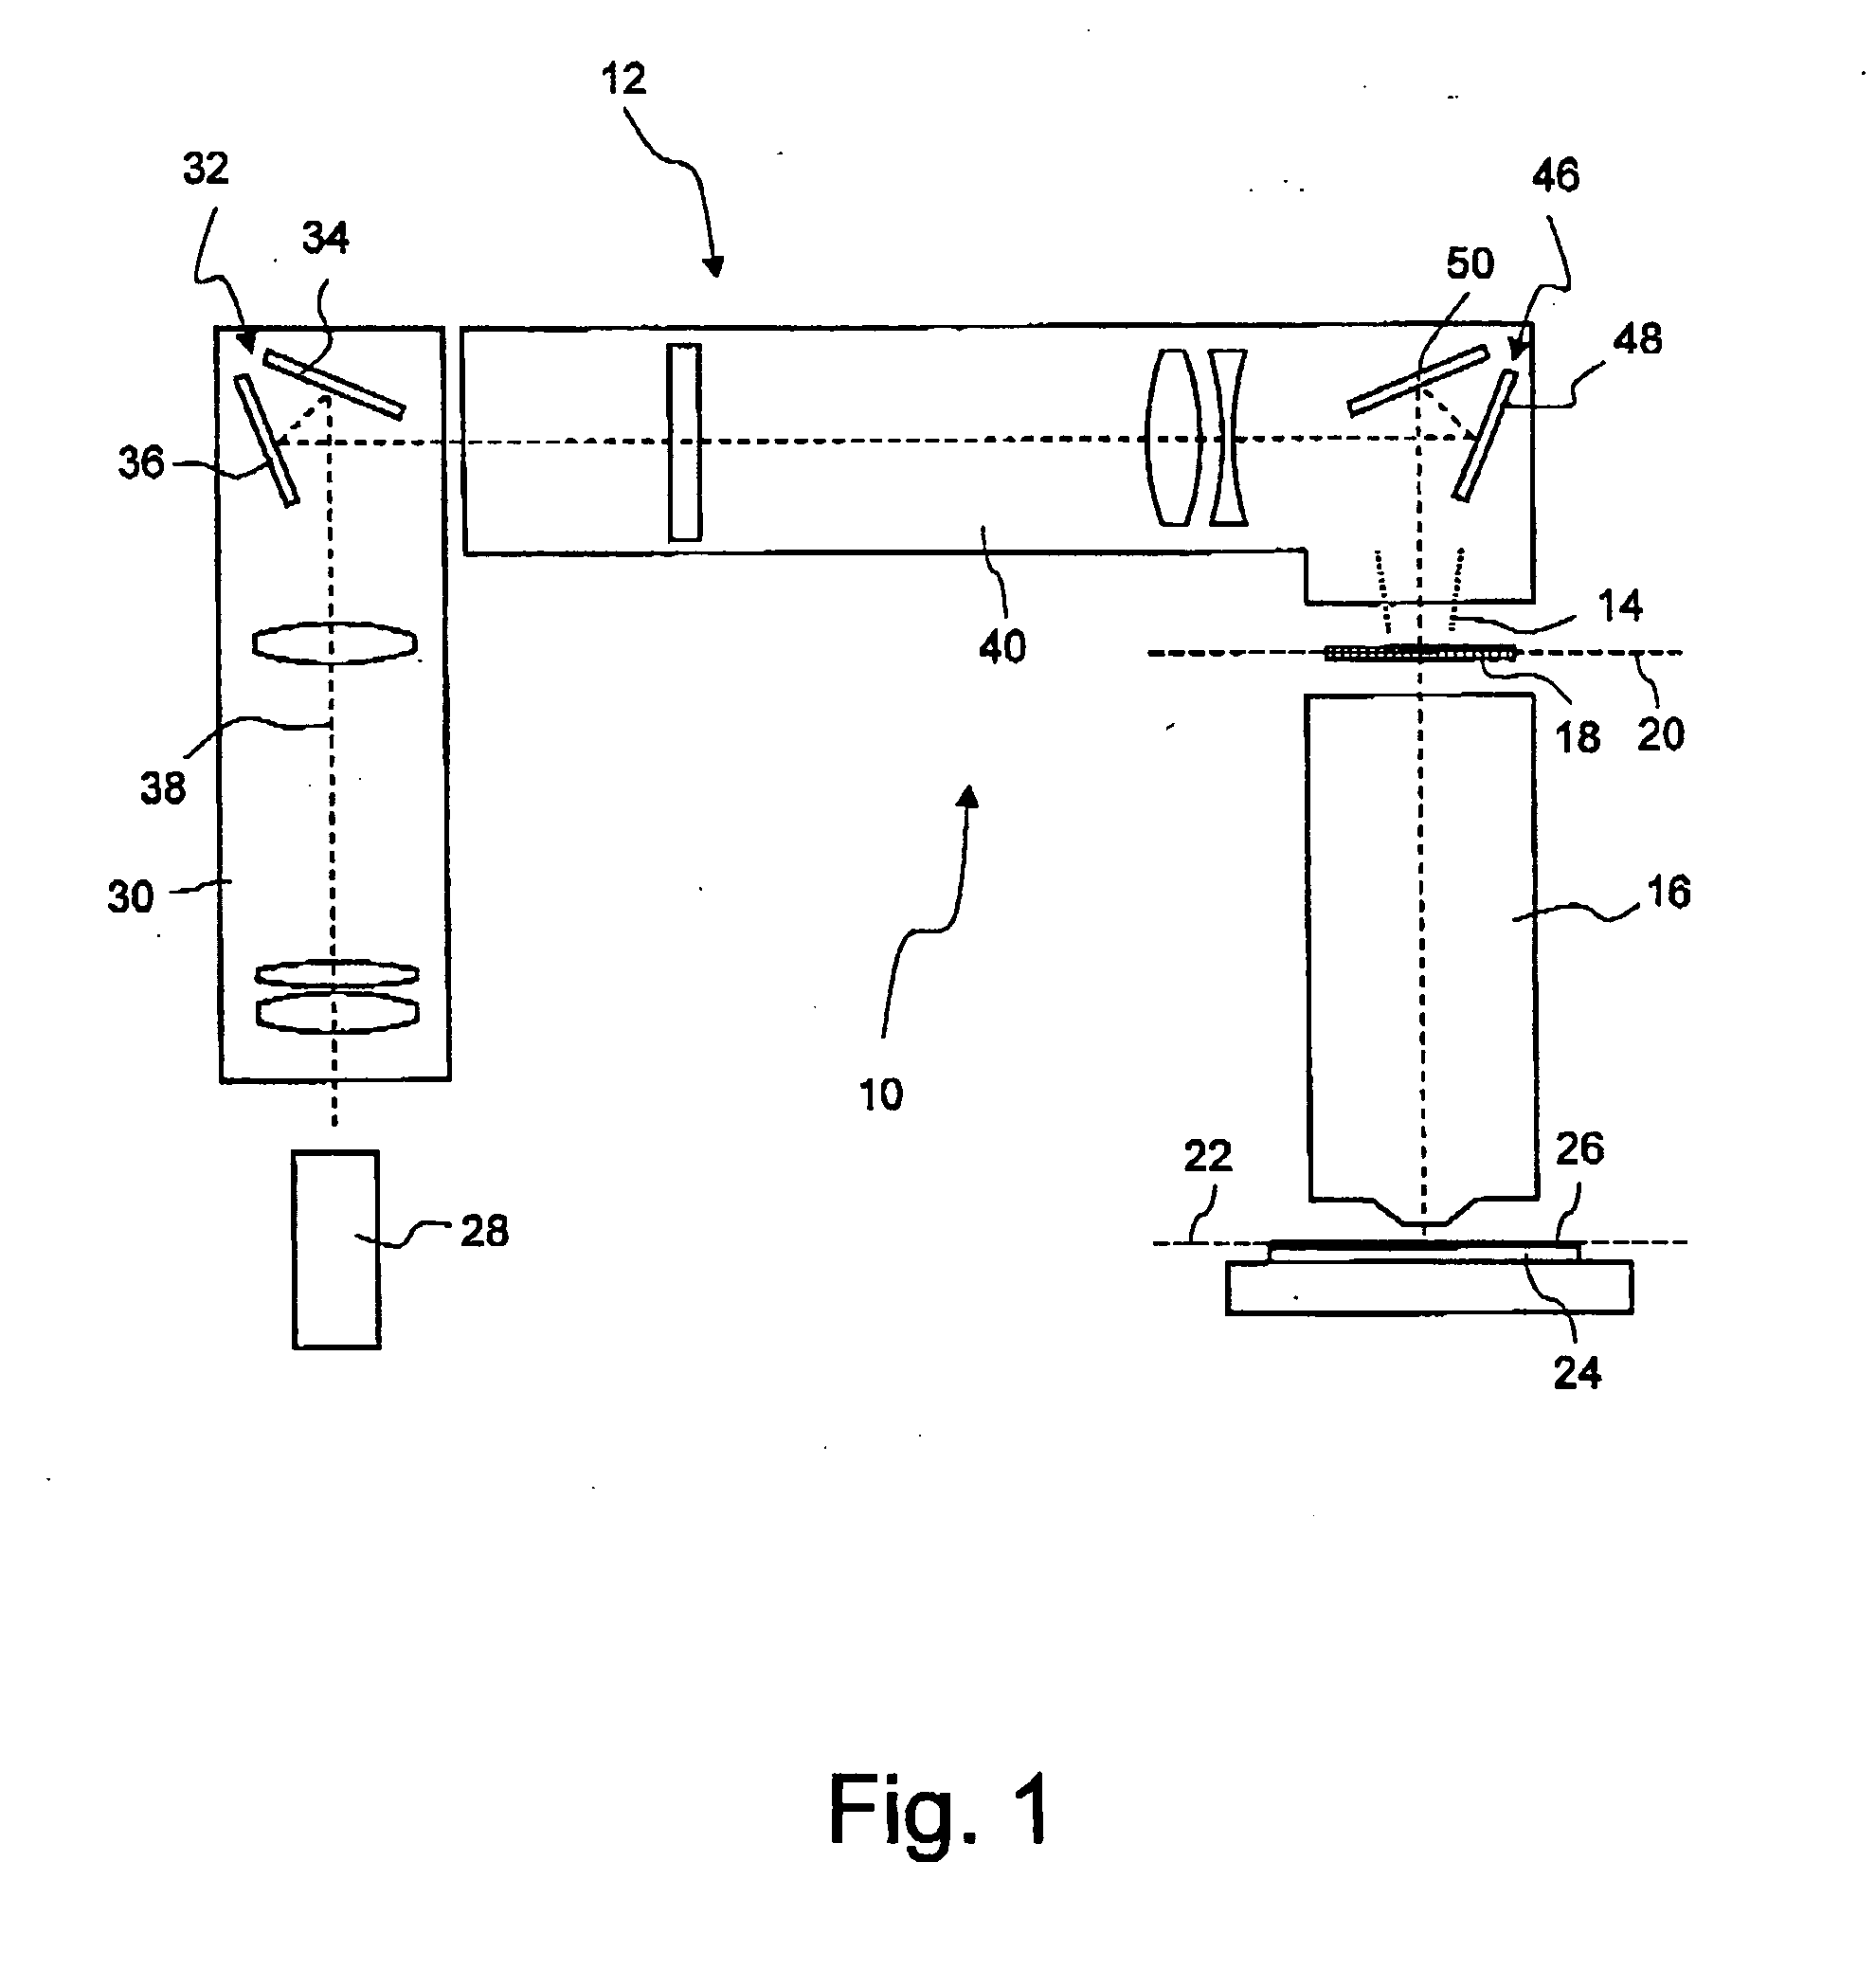 Optical system, in particular illumination system, of a microlithographic projection exposure apparatus